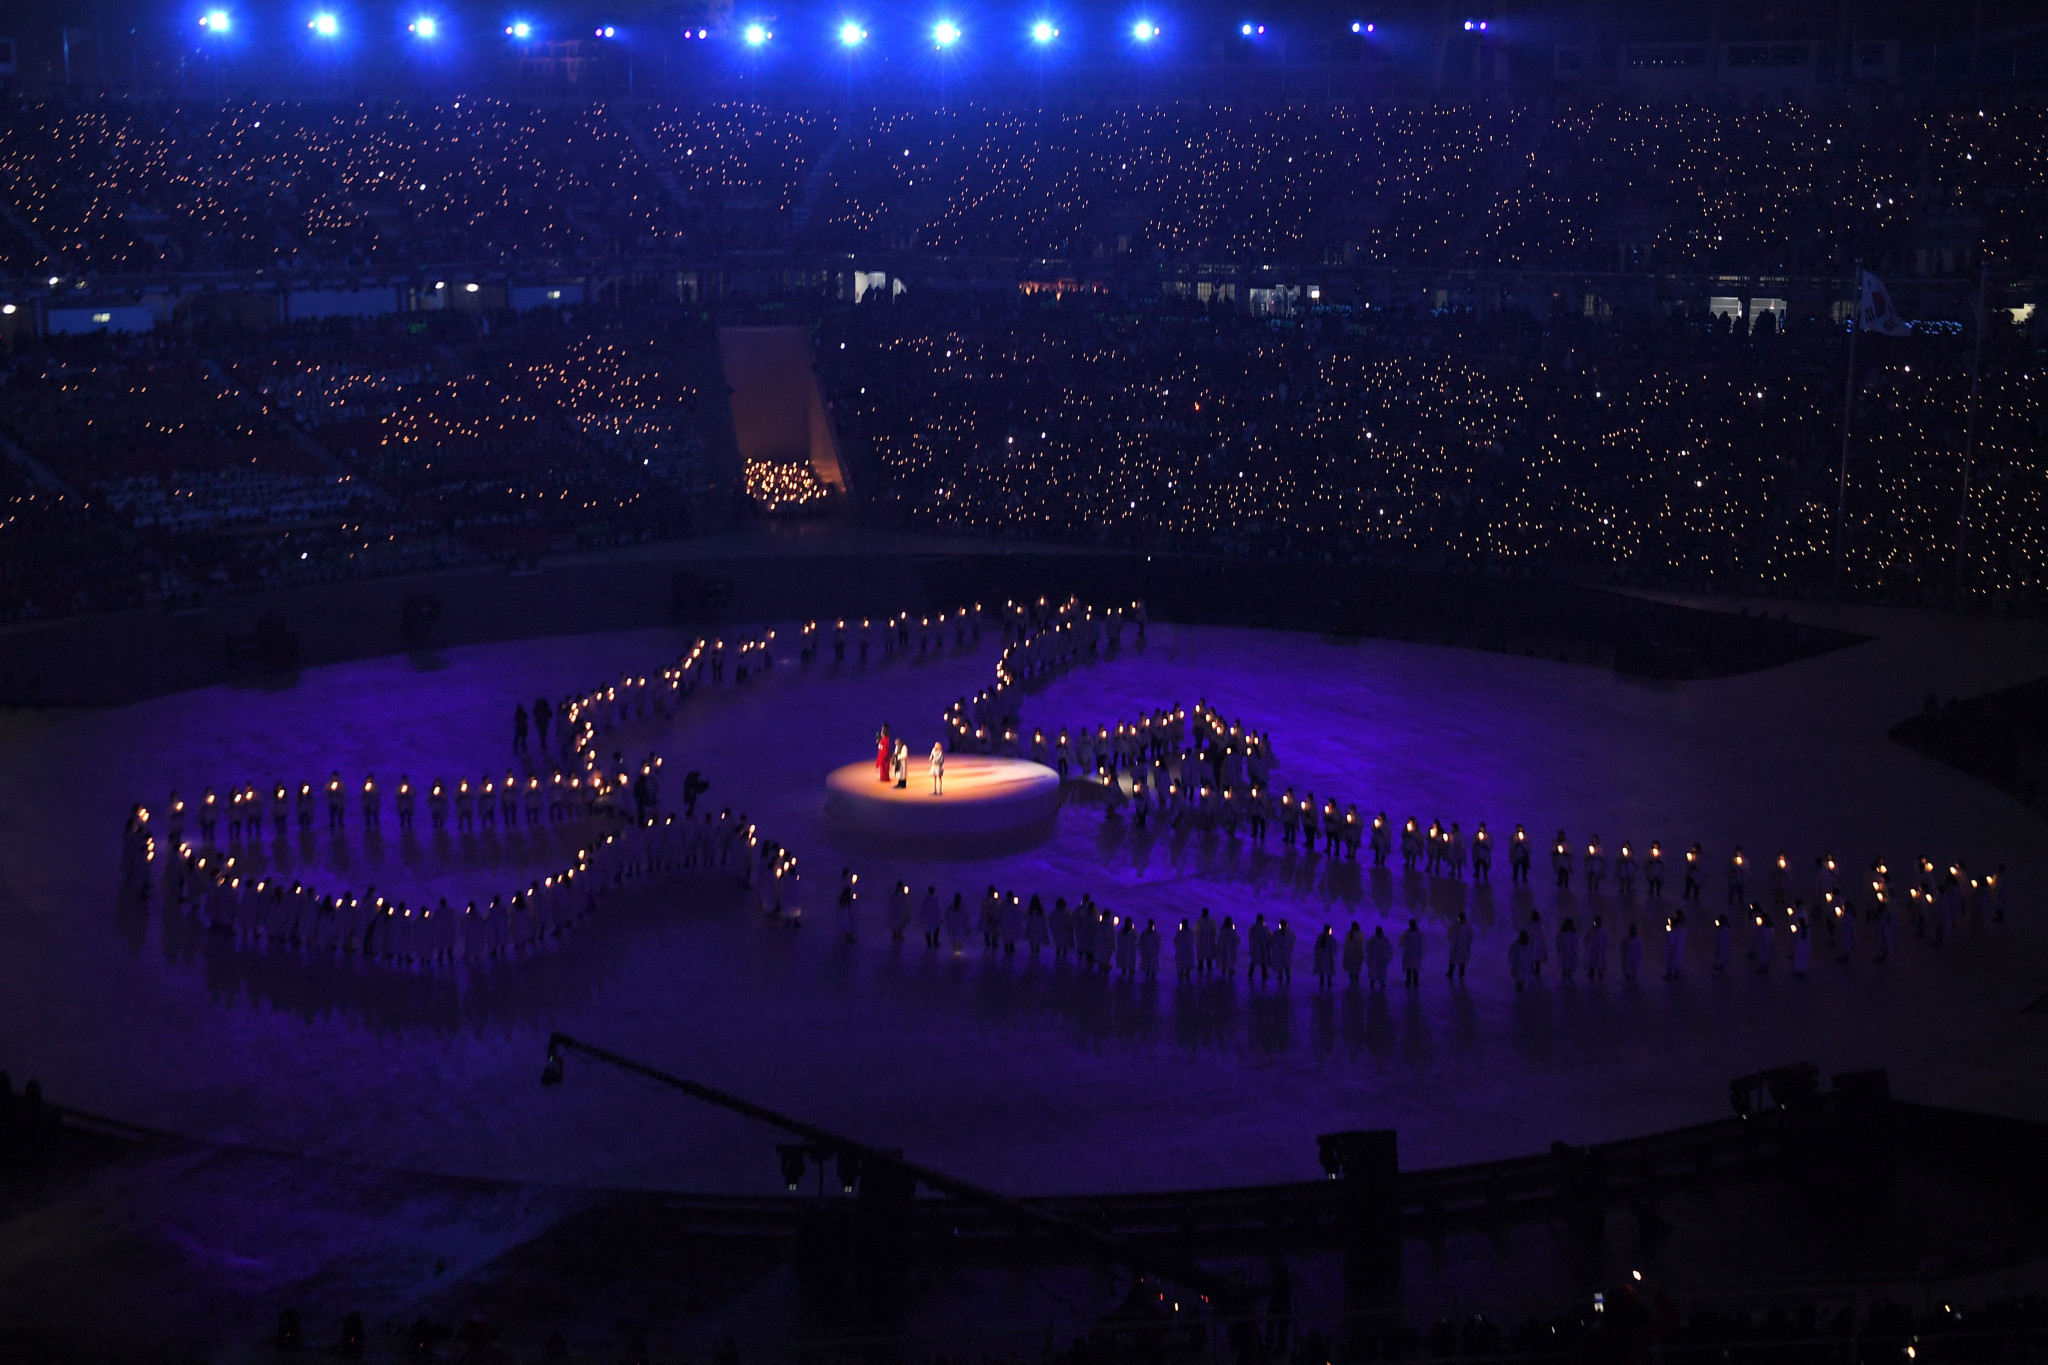 KT's 5G technology controlled the LED lights on a giant peace dove at the Opening Ceremony f the Winter Olympic Games in Pyeongchang last month ©Getty Images